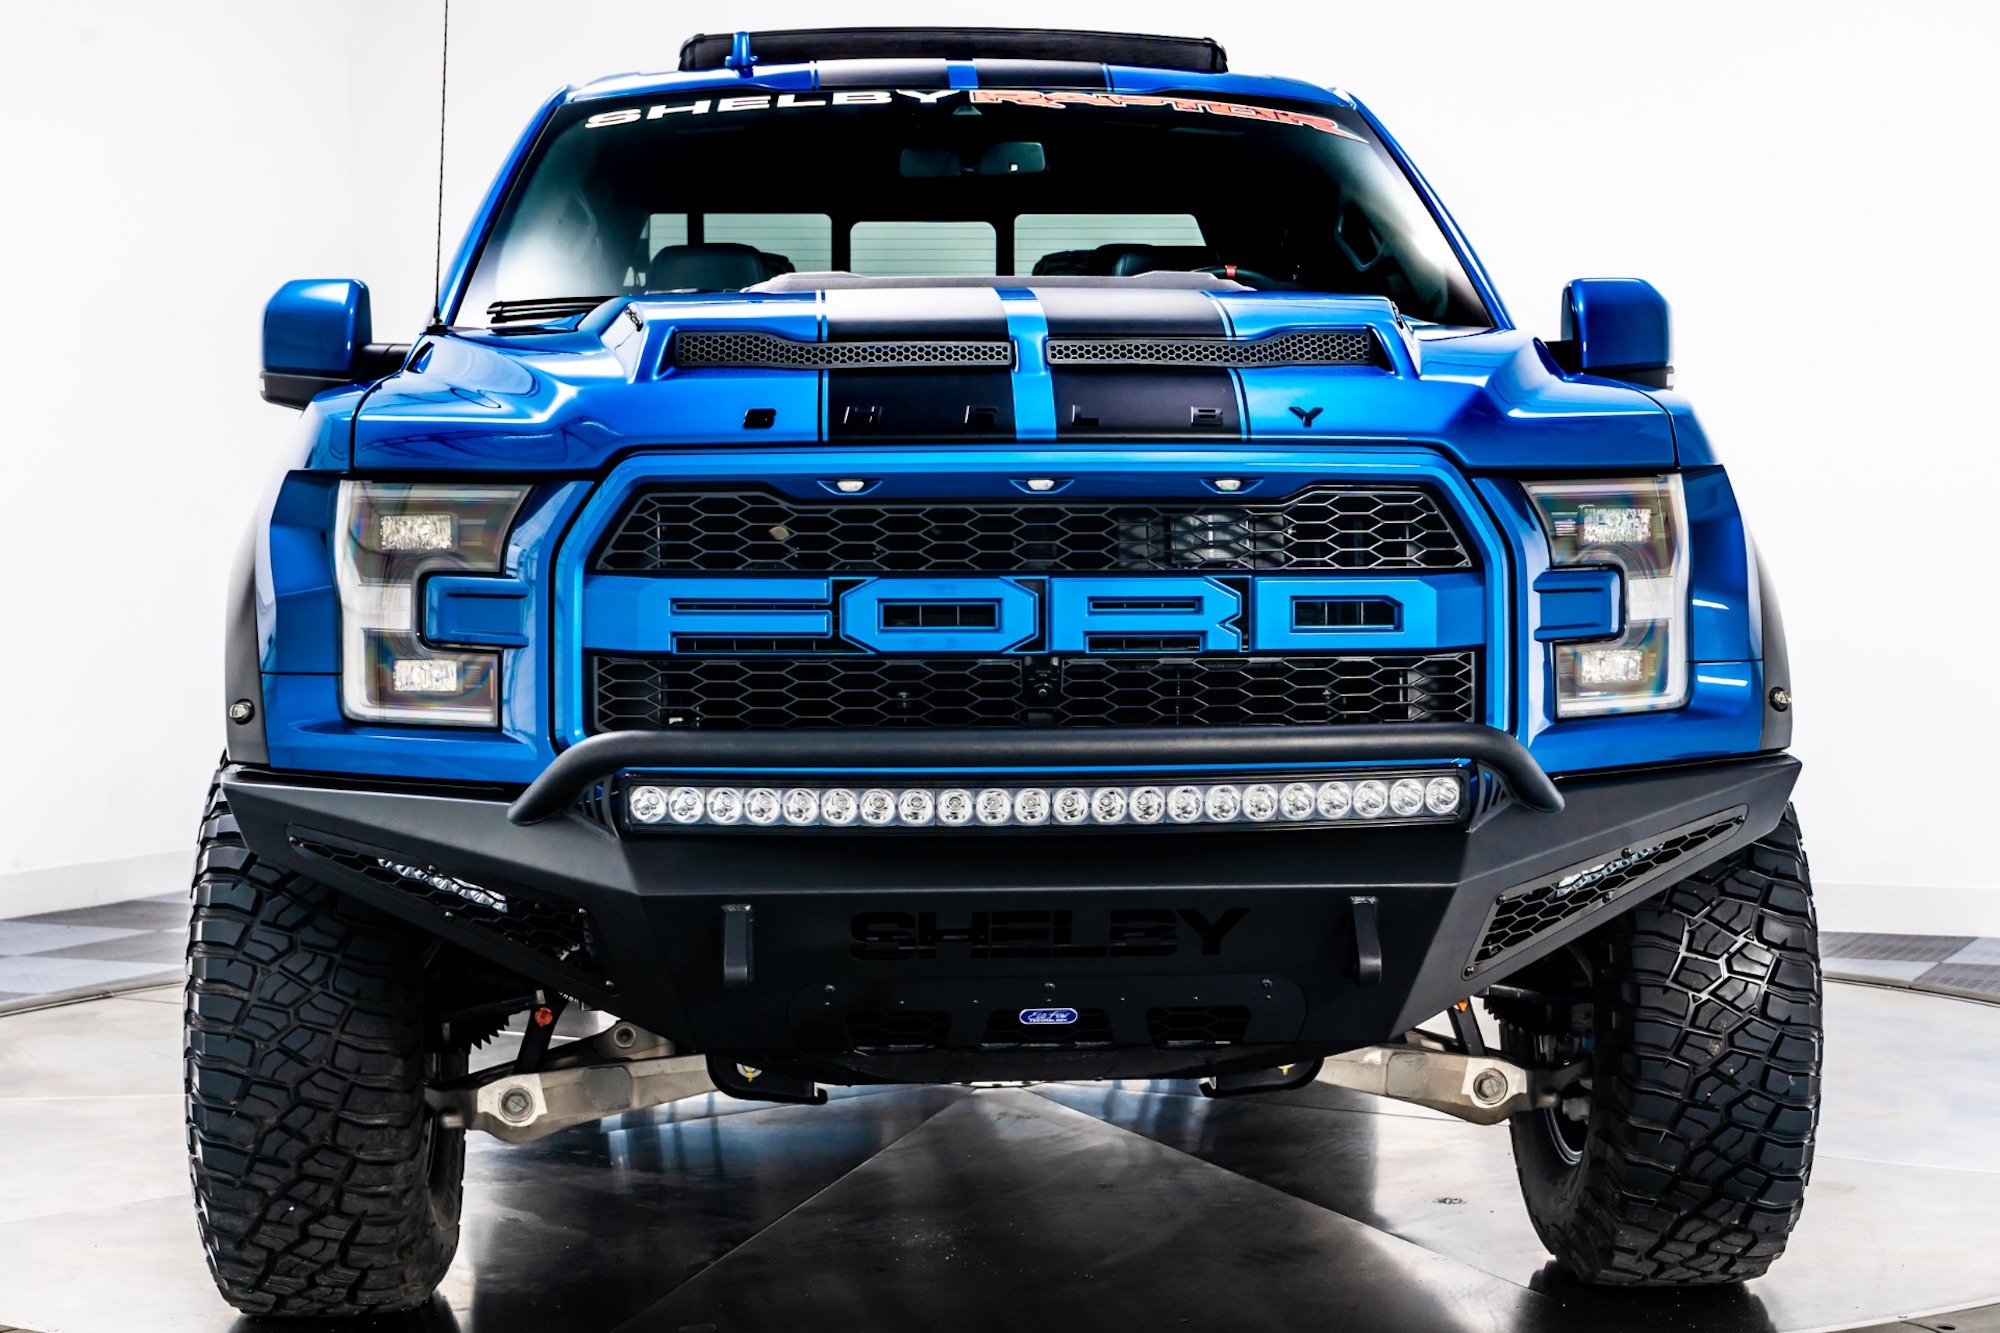 2020 Ford Raptor Shelby in blue